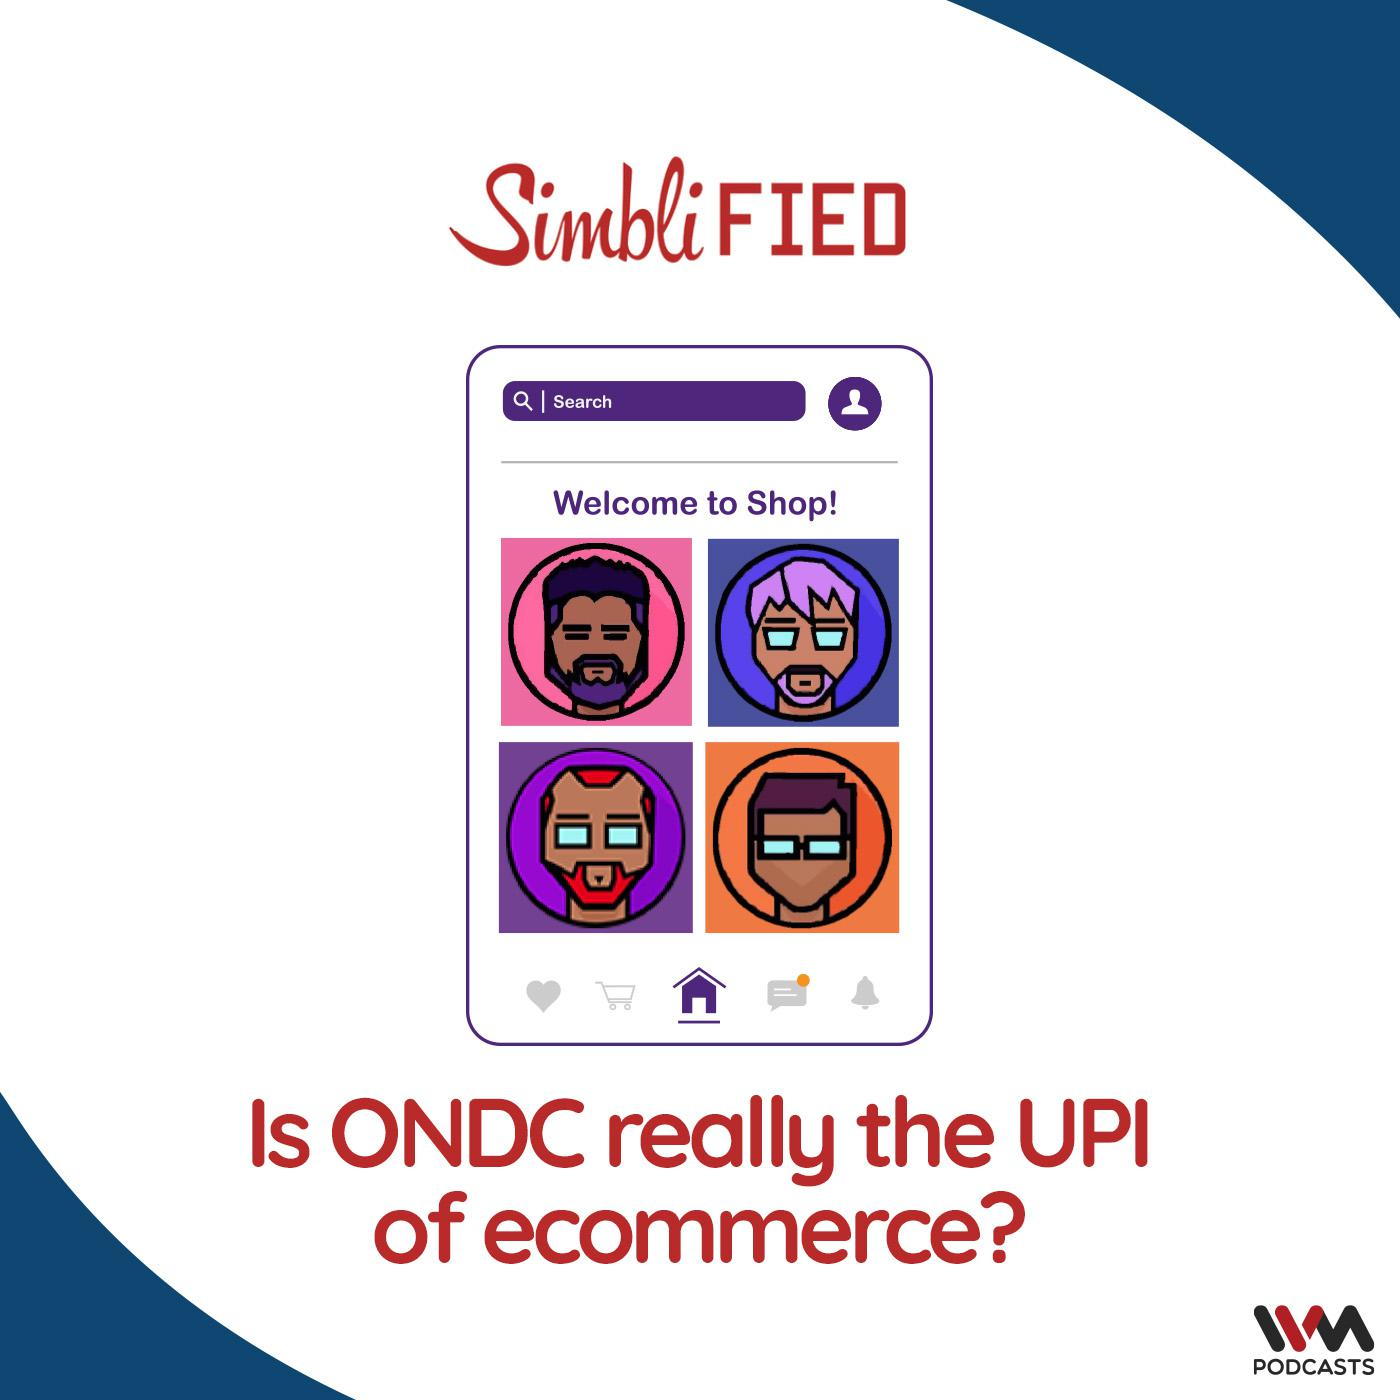 Is ONDC really the UPI of ecommerce?